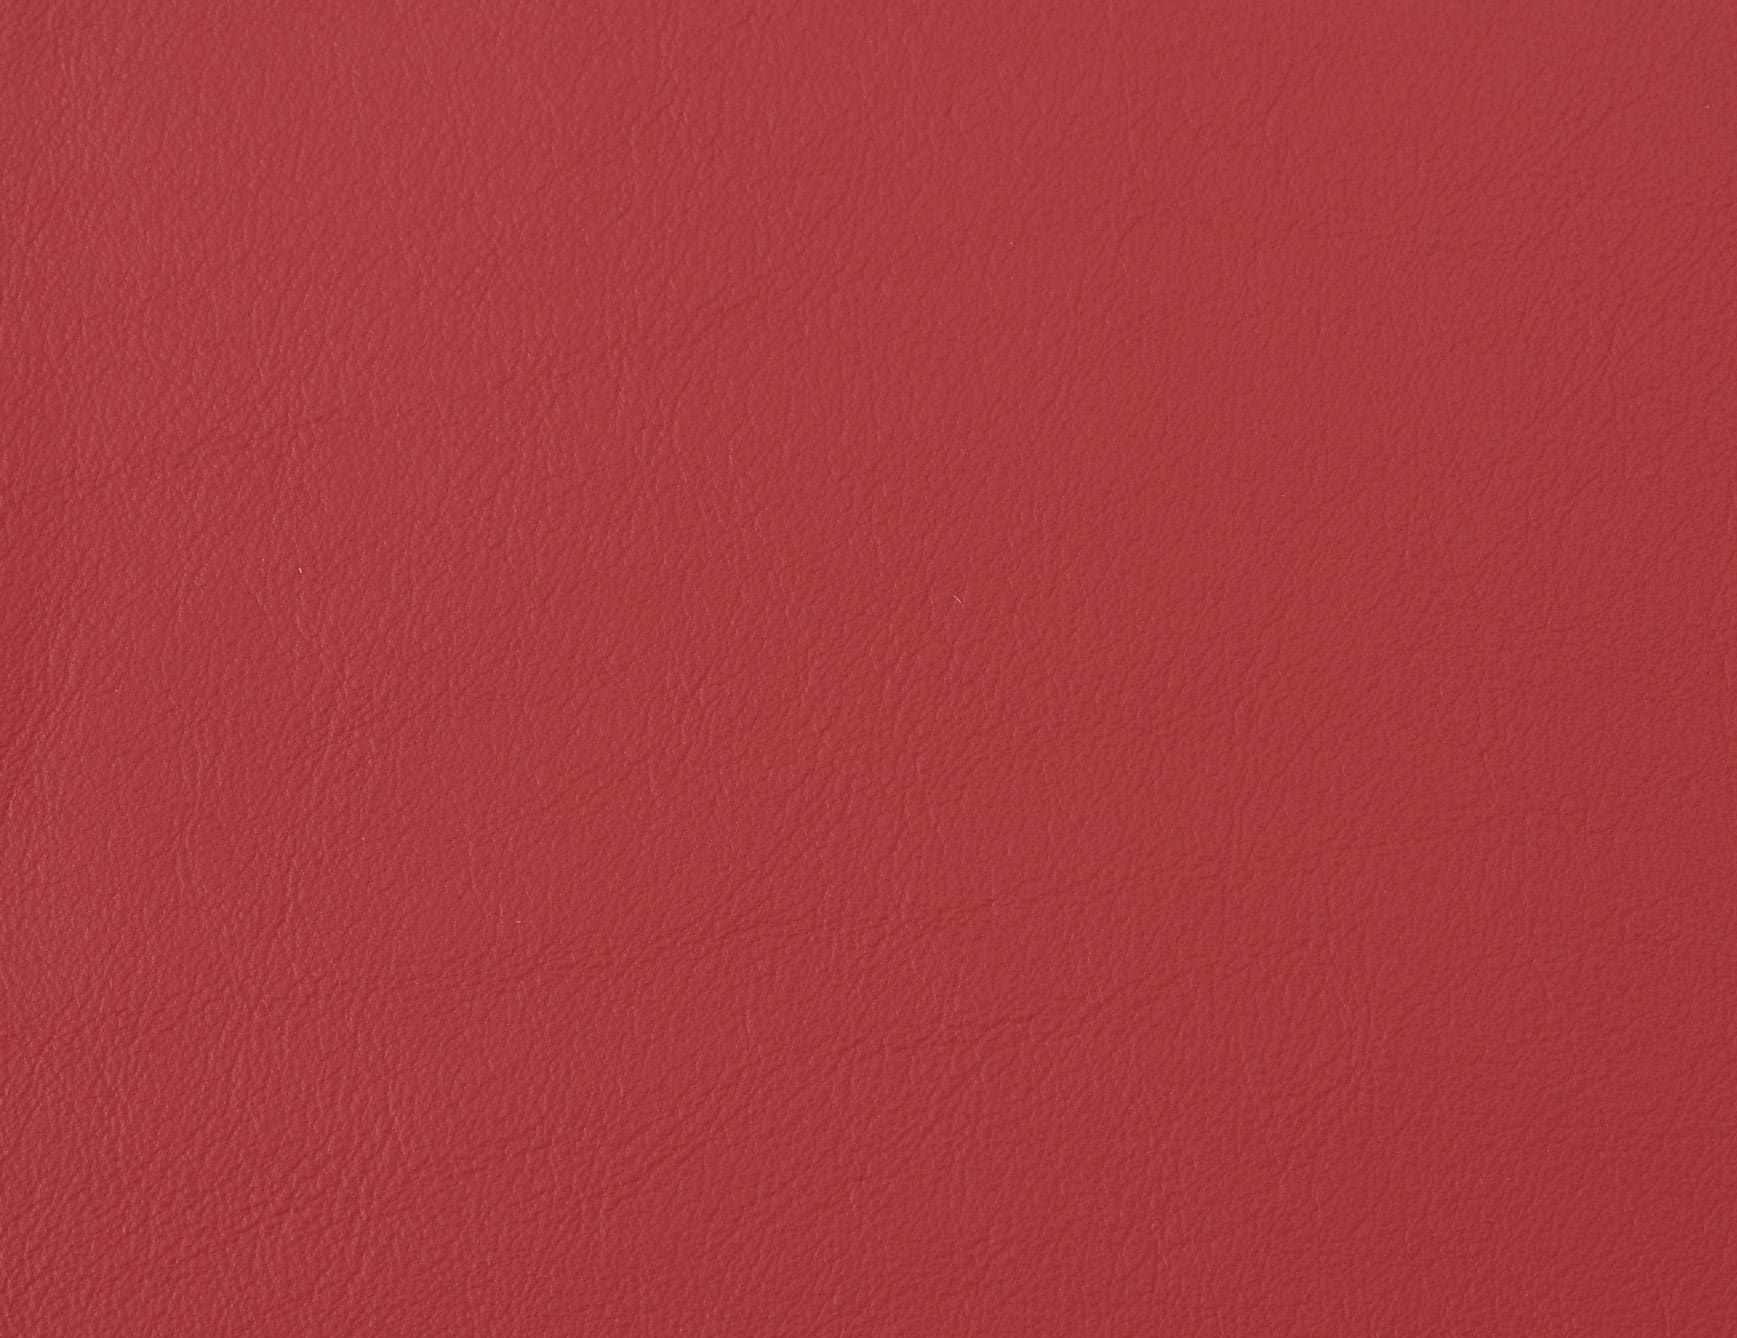 Geranio contemporary Italian upholstery leather in red